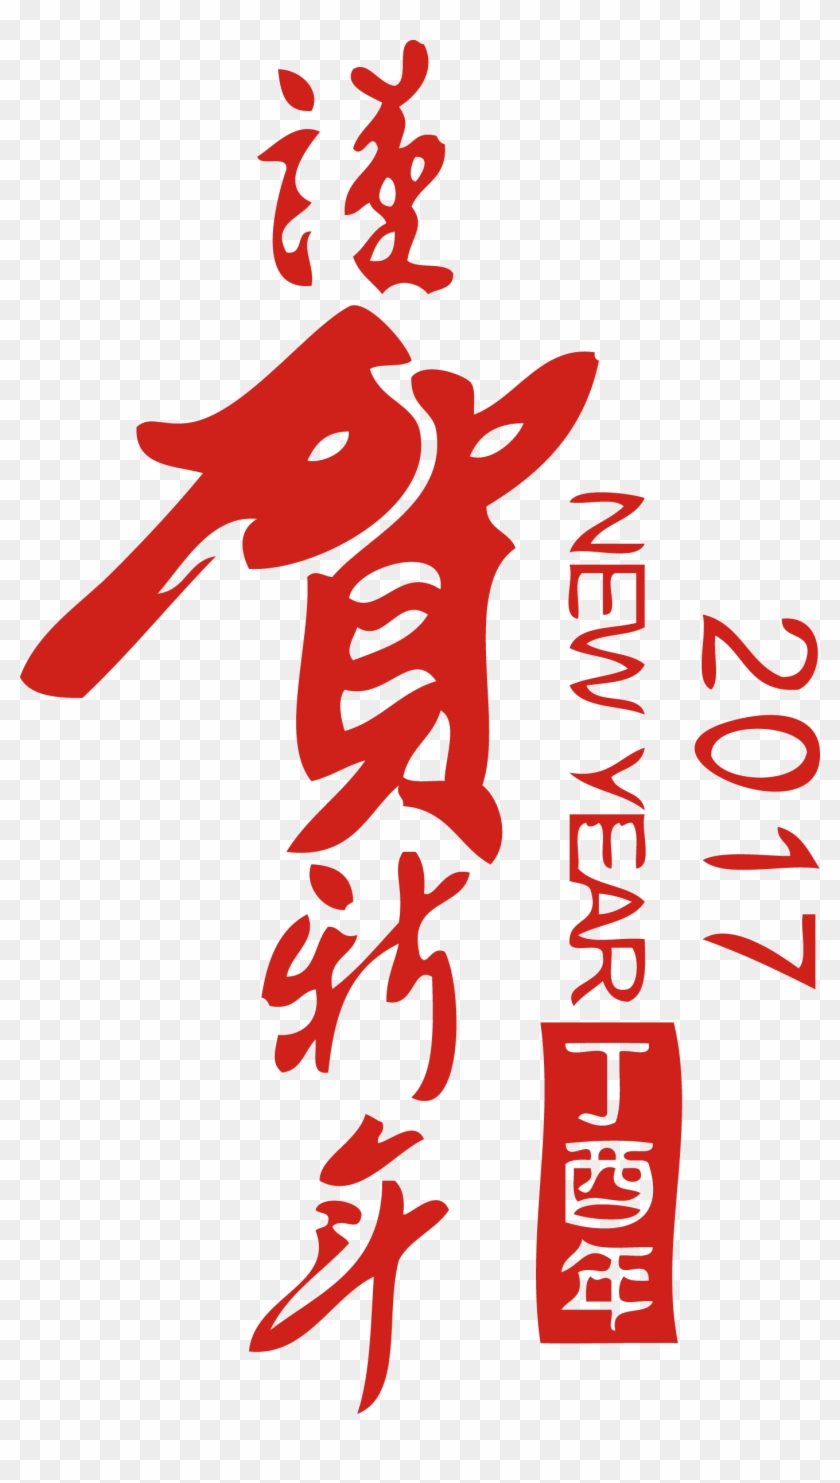 Chinese New Year Chinese Calligraphy Art - Unique Bargains New Year Decor Pvc Self-adhesive Removable #702539